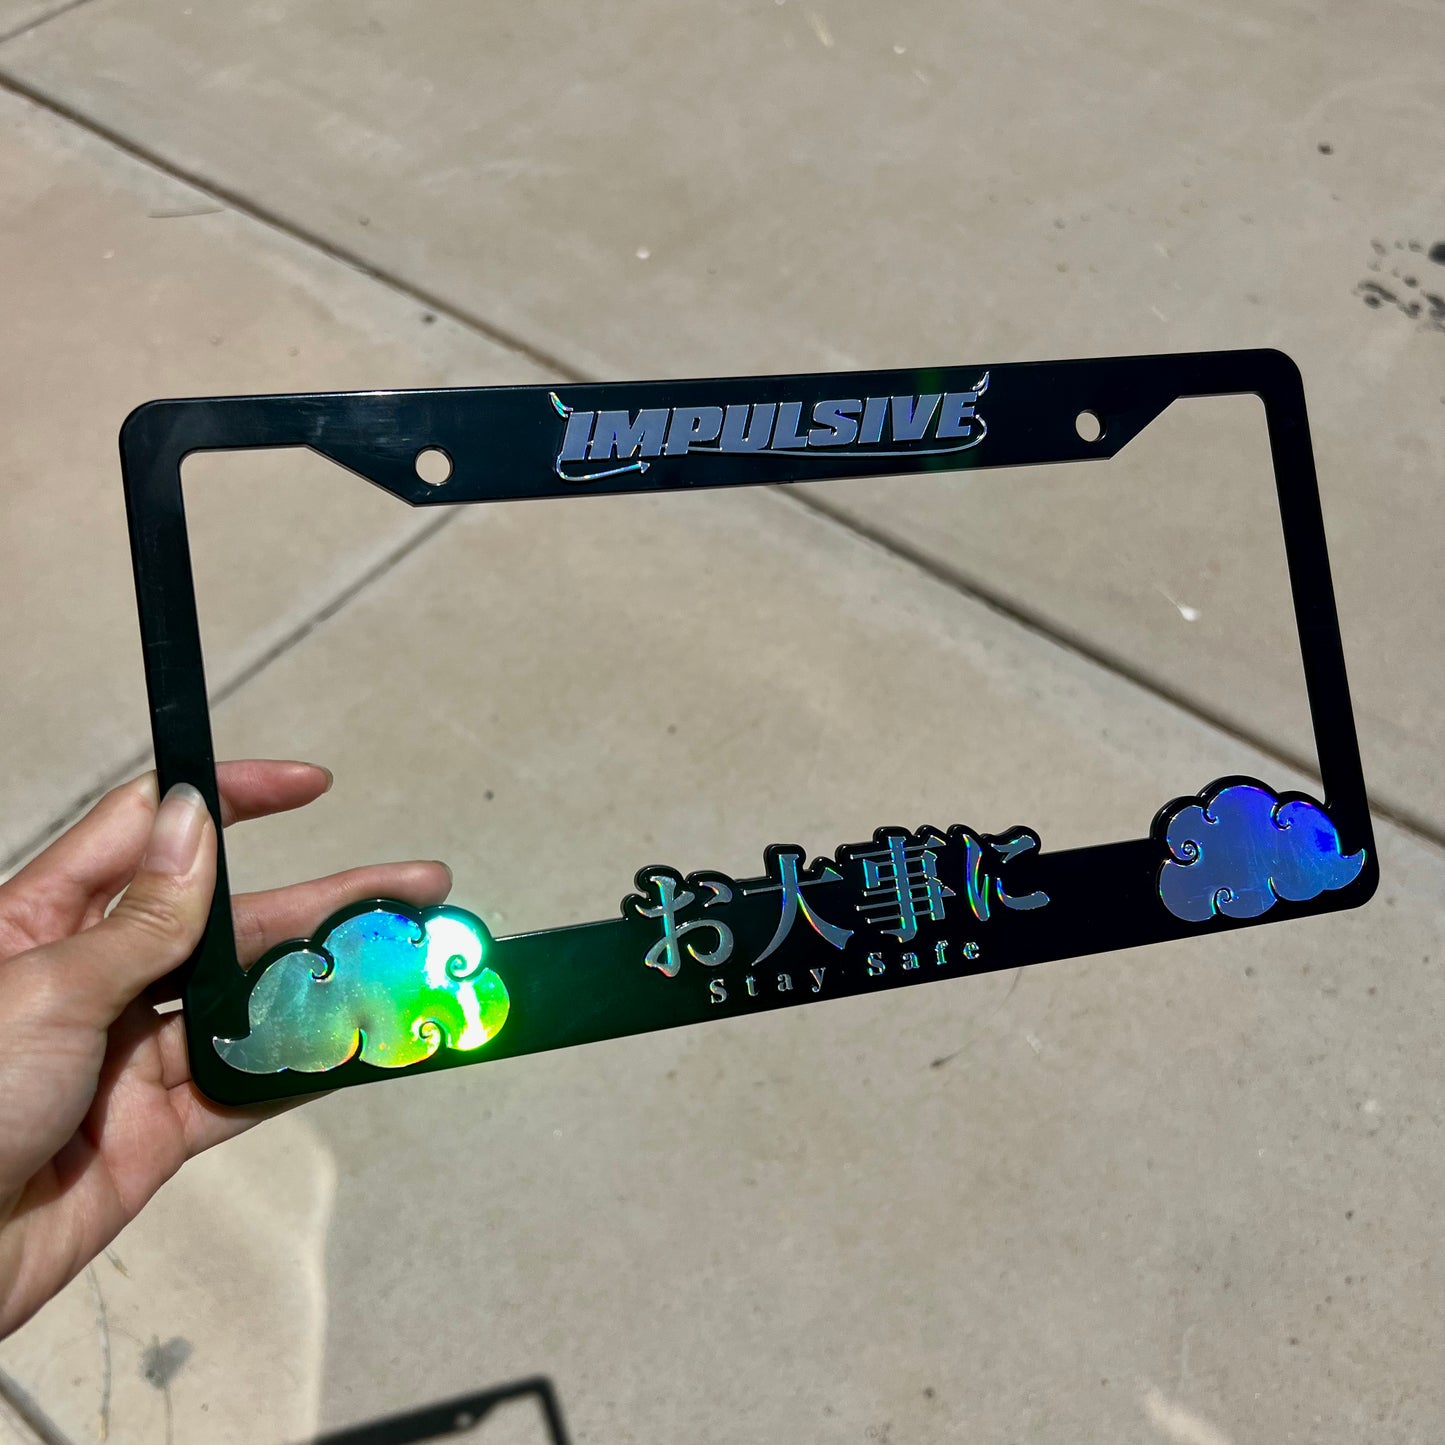 Japanese anime inspired plastic custom License Plate Frame. Top has Impulsive logo and the bottom has japanese characters and english translated to stay safe surrounding with japanese clouds. Asian inspired. Black Frame with chrome rainbow oilslick lettering.